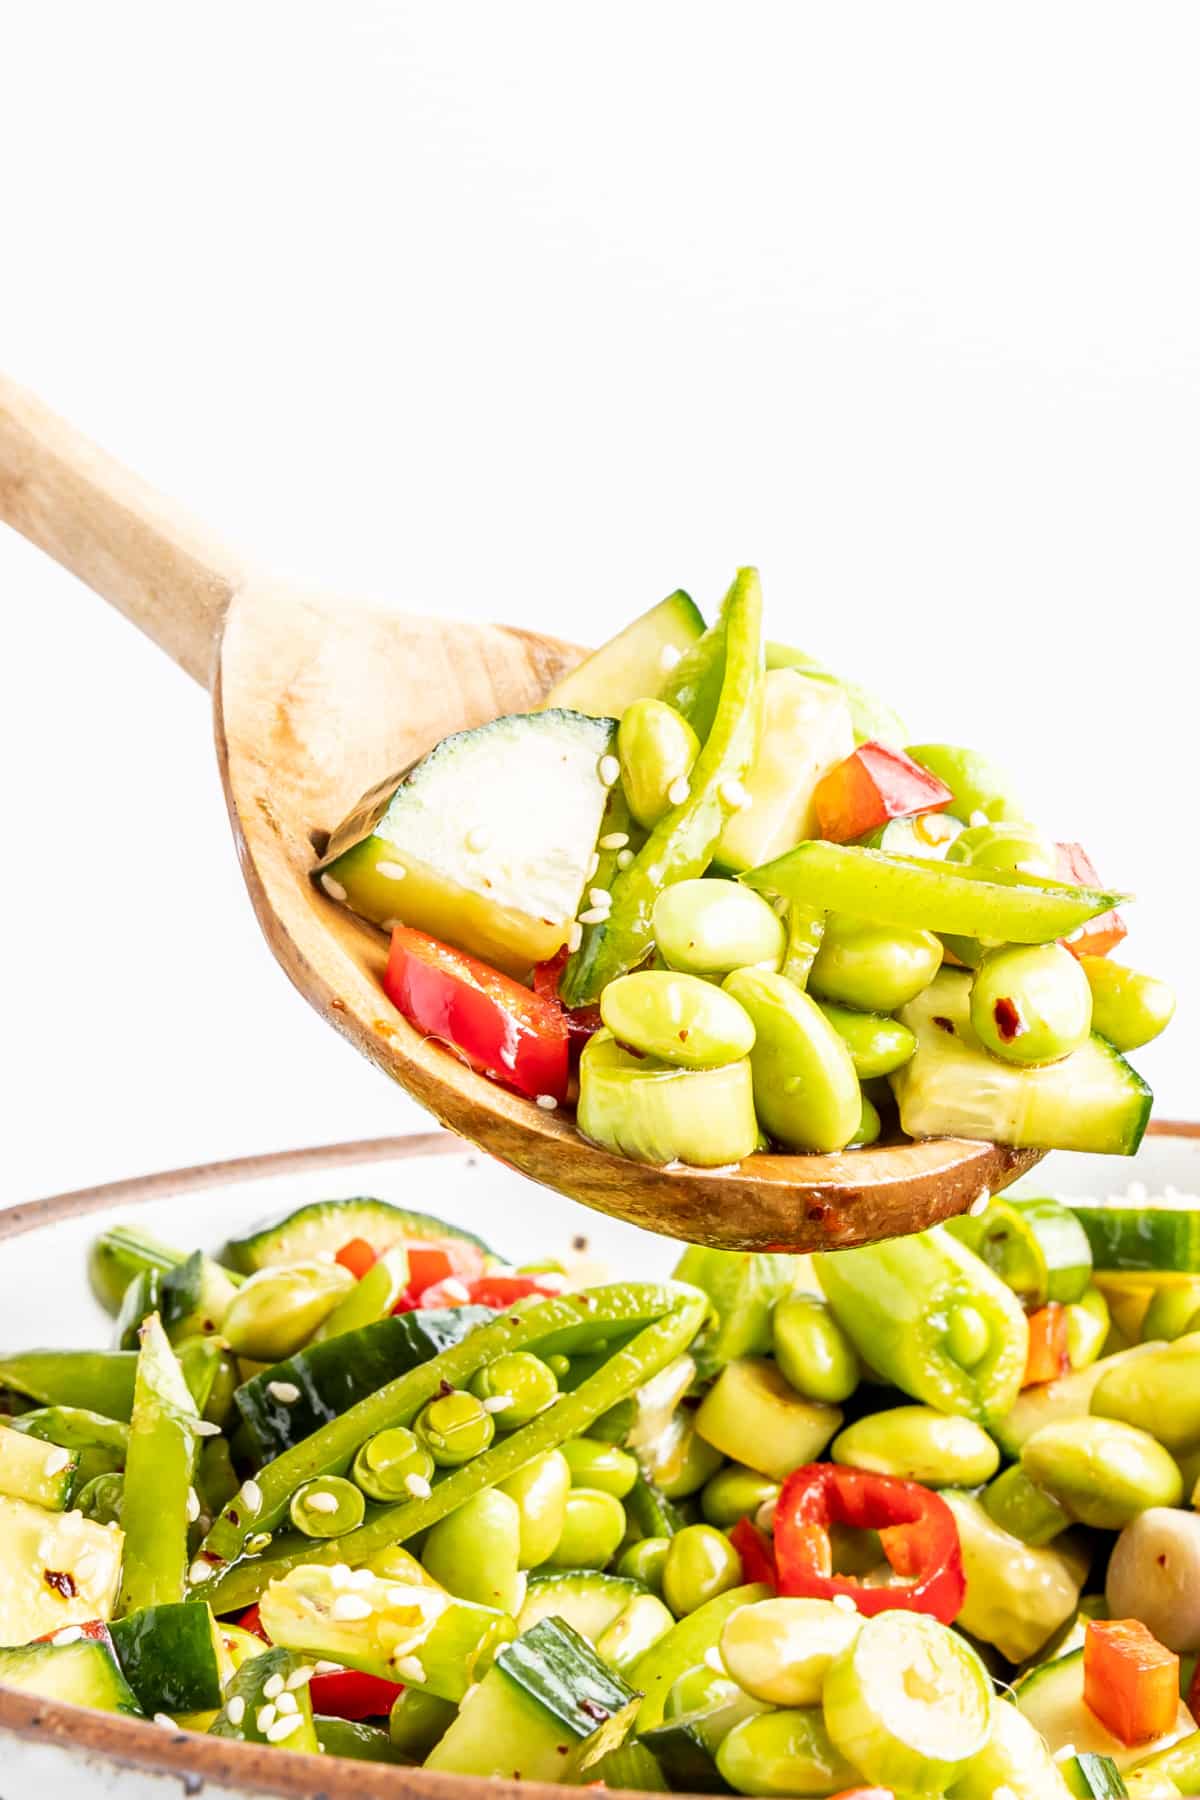 A wooden spoon full of edamame cucumber salad over a bowl of the salad: salad has edamame, cucumber, snap peas, red bell pepper, green onions, chili peppers and sesame seeds.